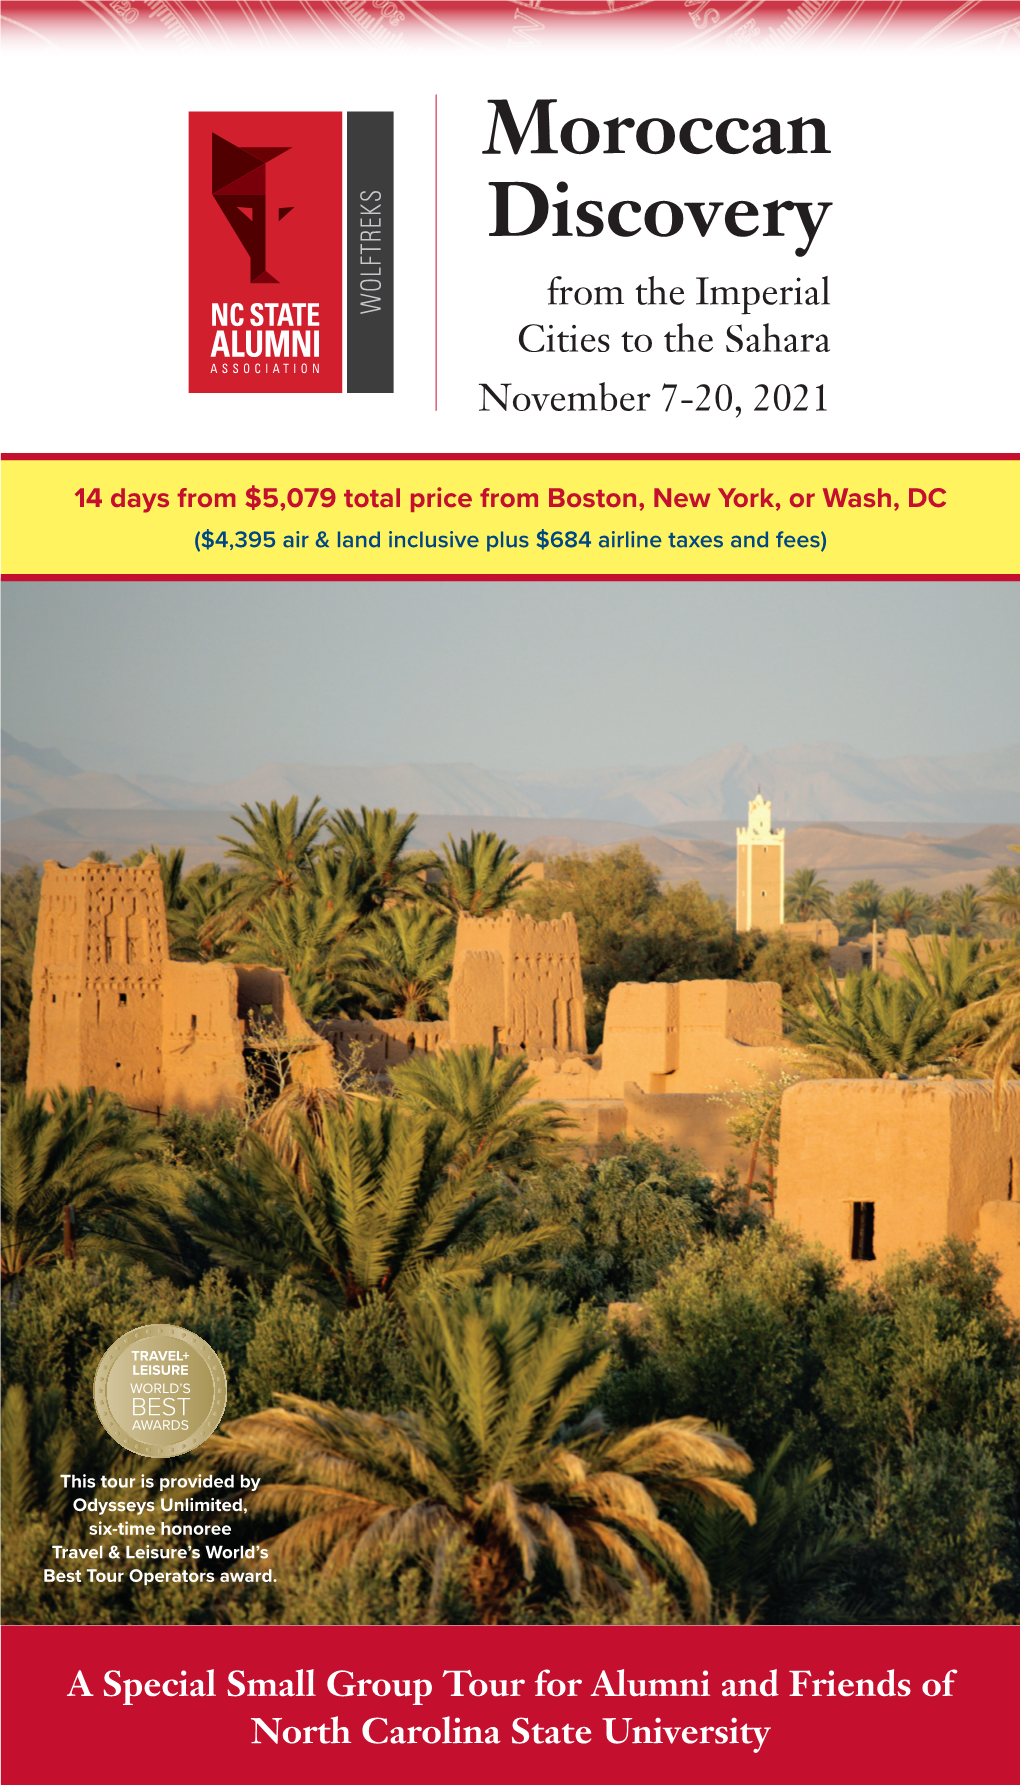 Moroccan Discovery from the Imperial Cities to the Sahara November 7-20, 2021